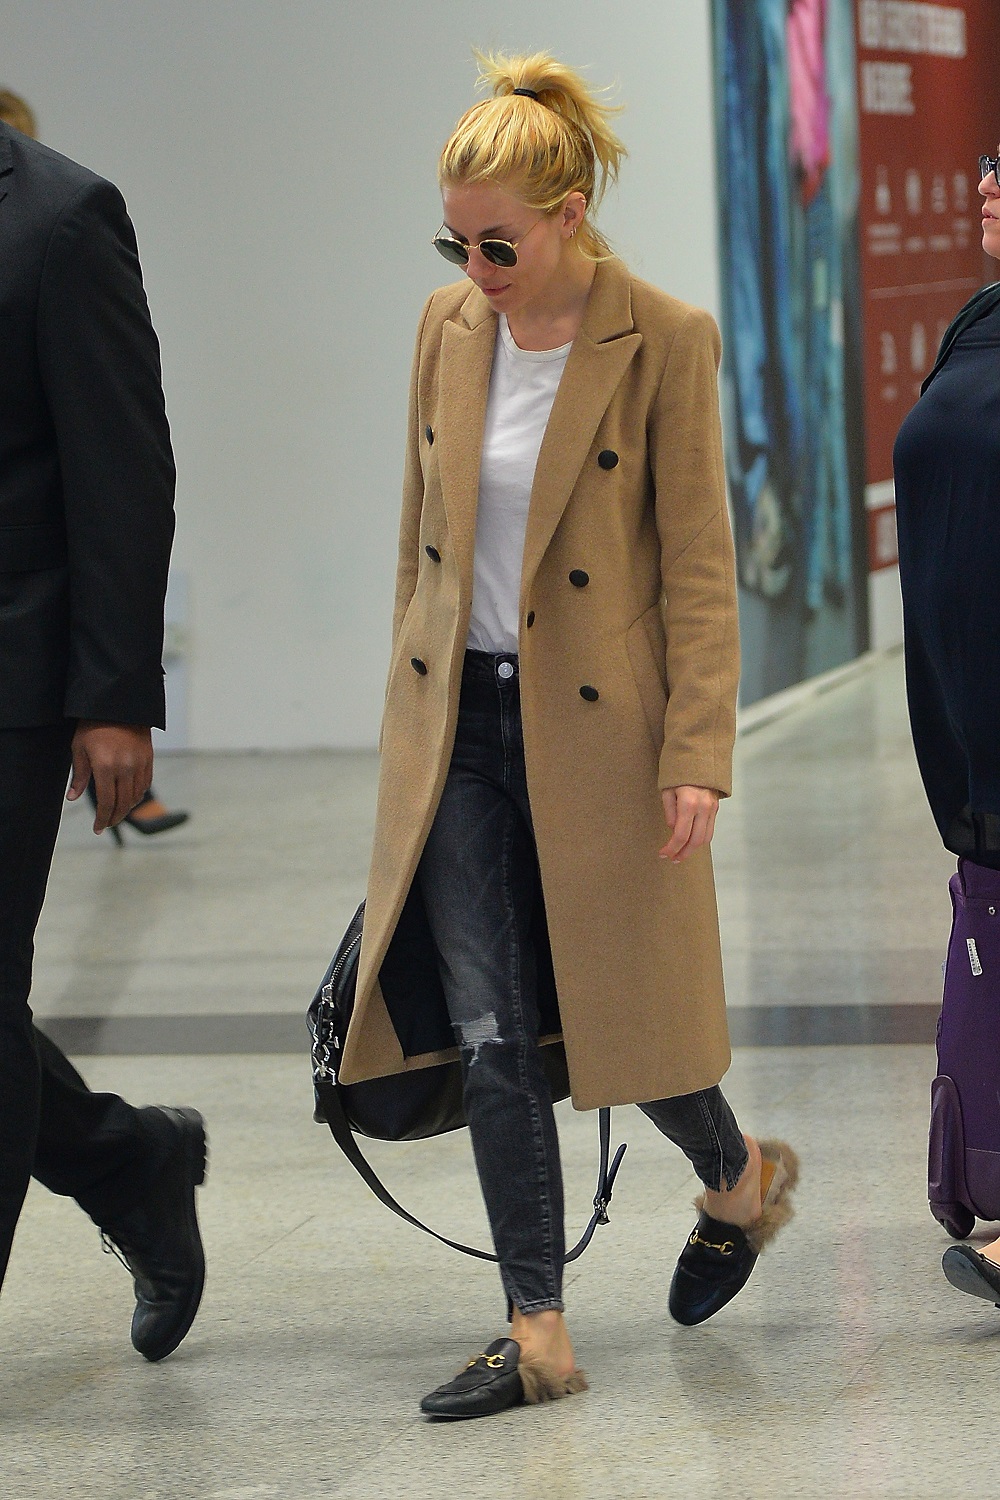 Sienna Miller in a rag&bone coat and Gucci loafers in Rome.